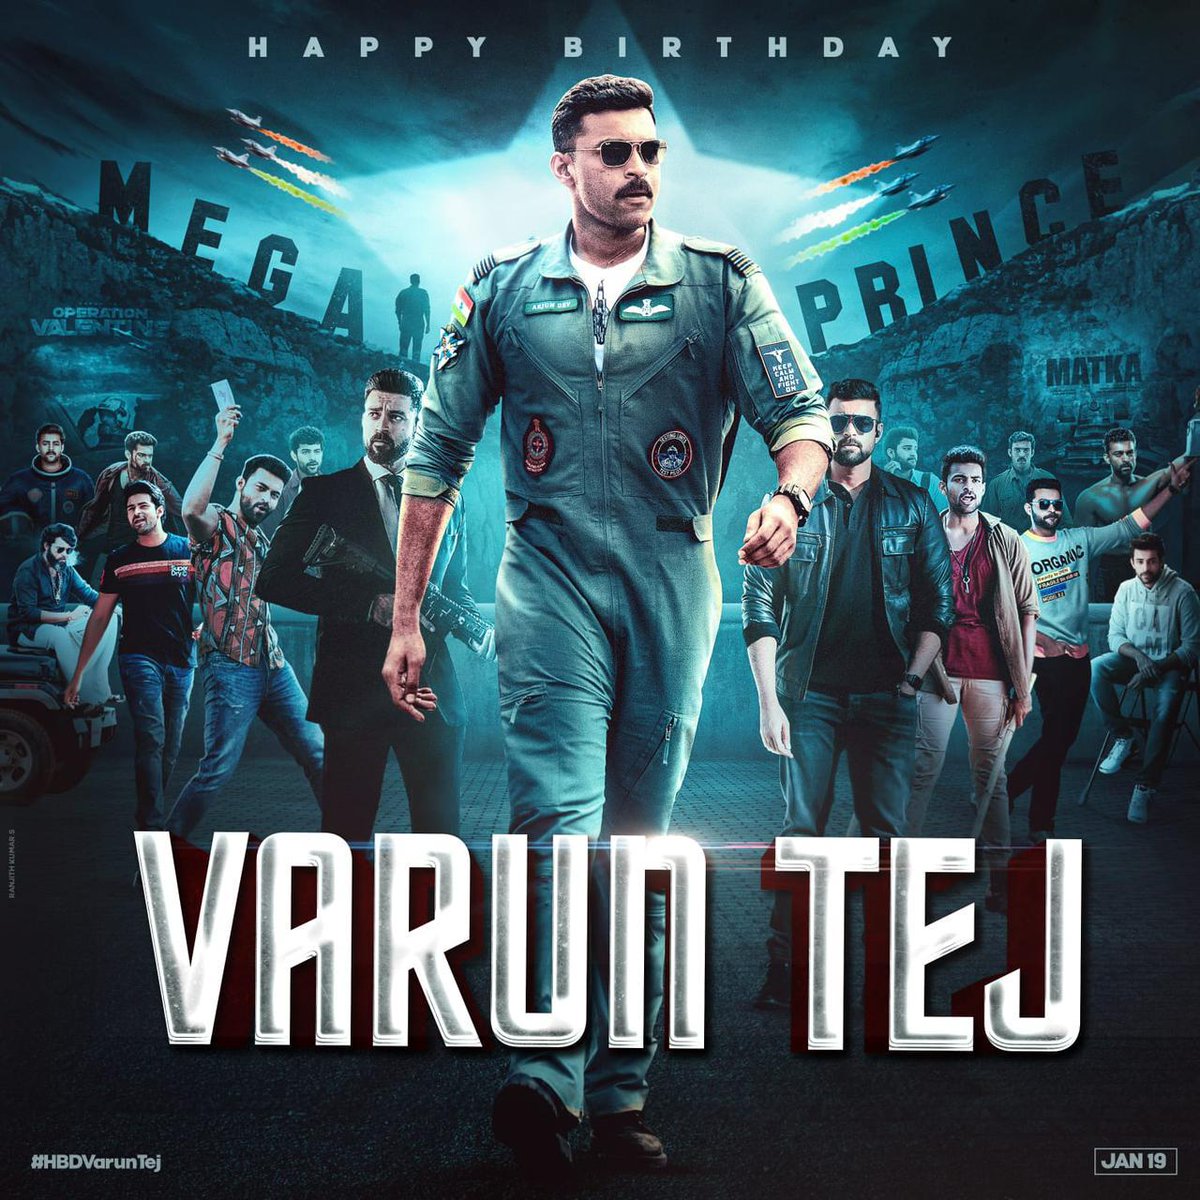 Here's the scintillating SPECIAL CDP to celebrate 𝑴𝒆𝒈𝒂 𝑷𝒓𝒊𝒏𝒄𝒆 @IAmVarunTej's Birthday 🎉 Wishing him a phenomenal year ahead with rocking success at the box office ❤️‍🔥 #HBDVarunTej ❤️